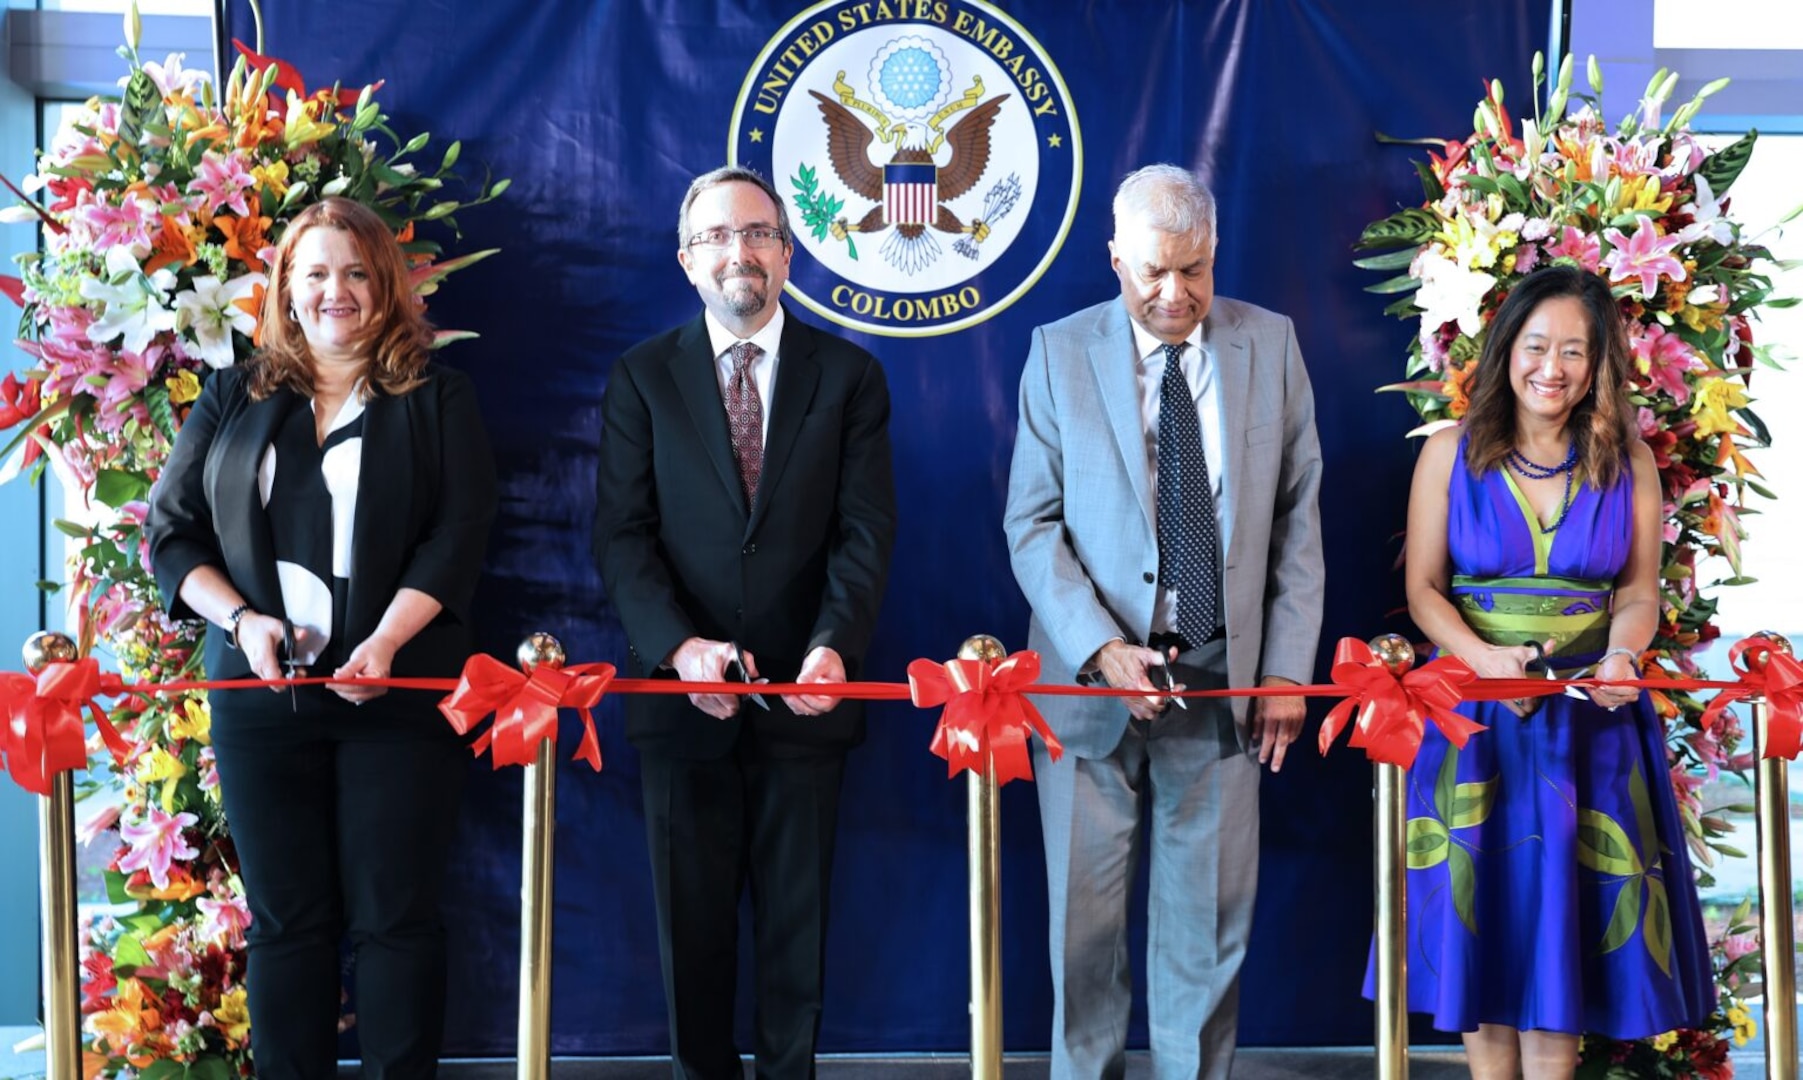 Opening of the U.S. Embassy Colombo